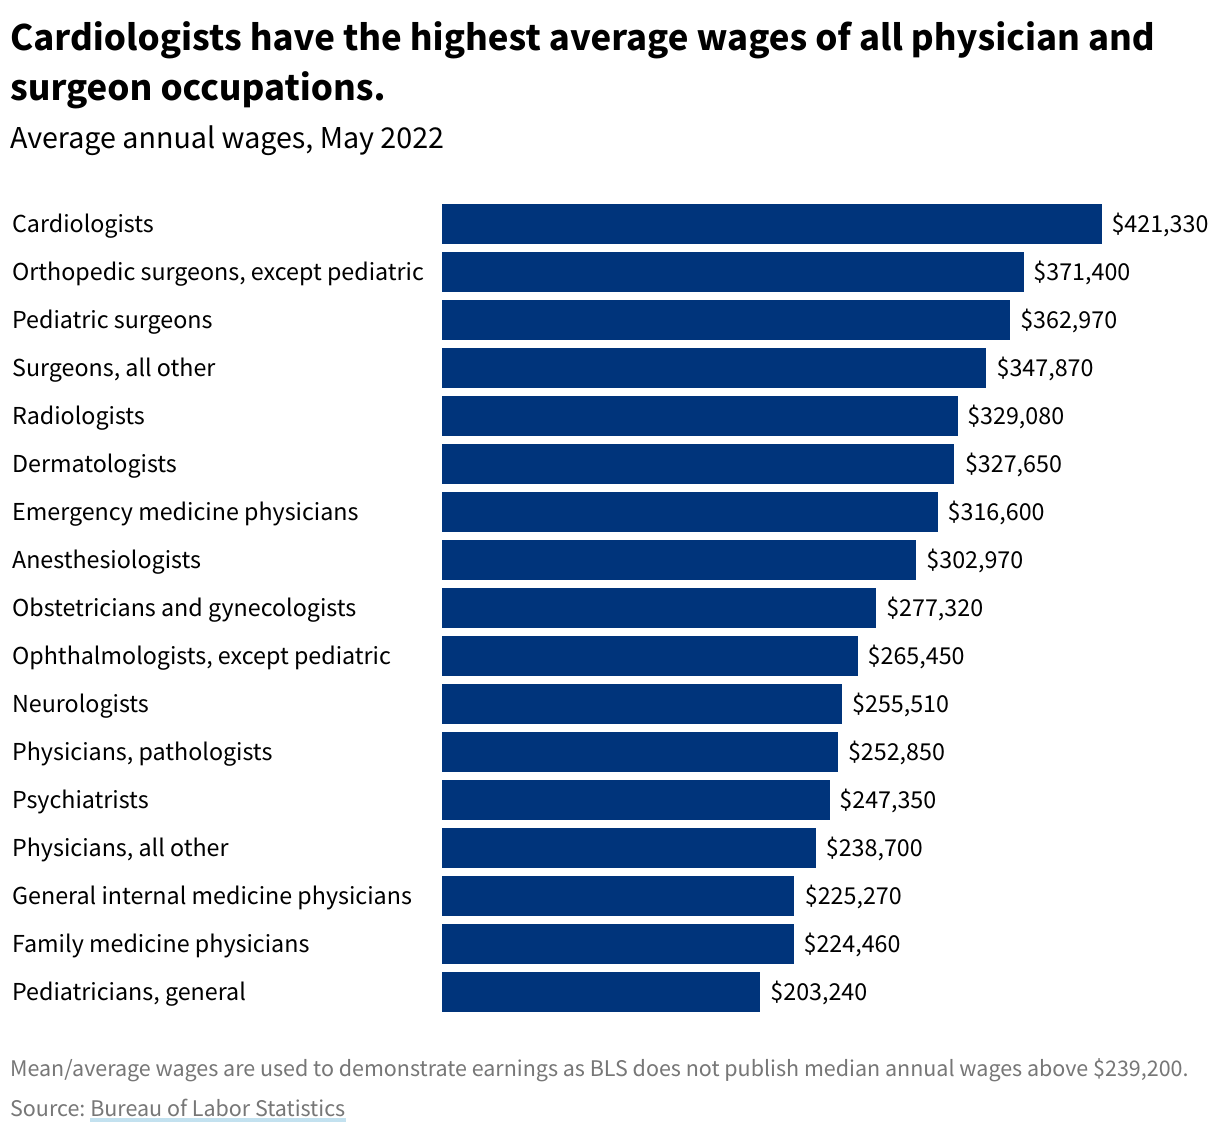 Bar chart showing mean income of physician and surgeon occupations, from highest to lowest. Cardiologists have the highest mean annual income at $421,330